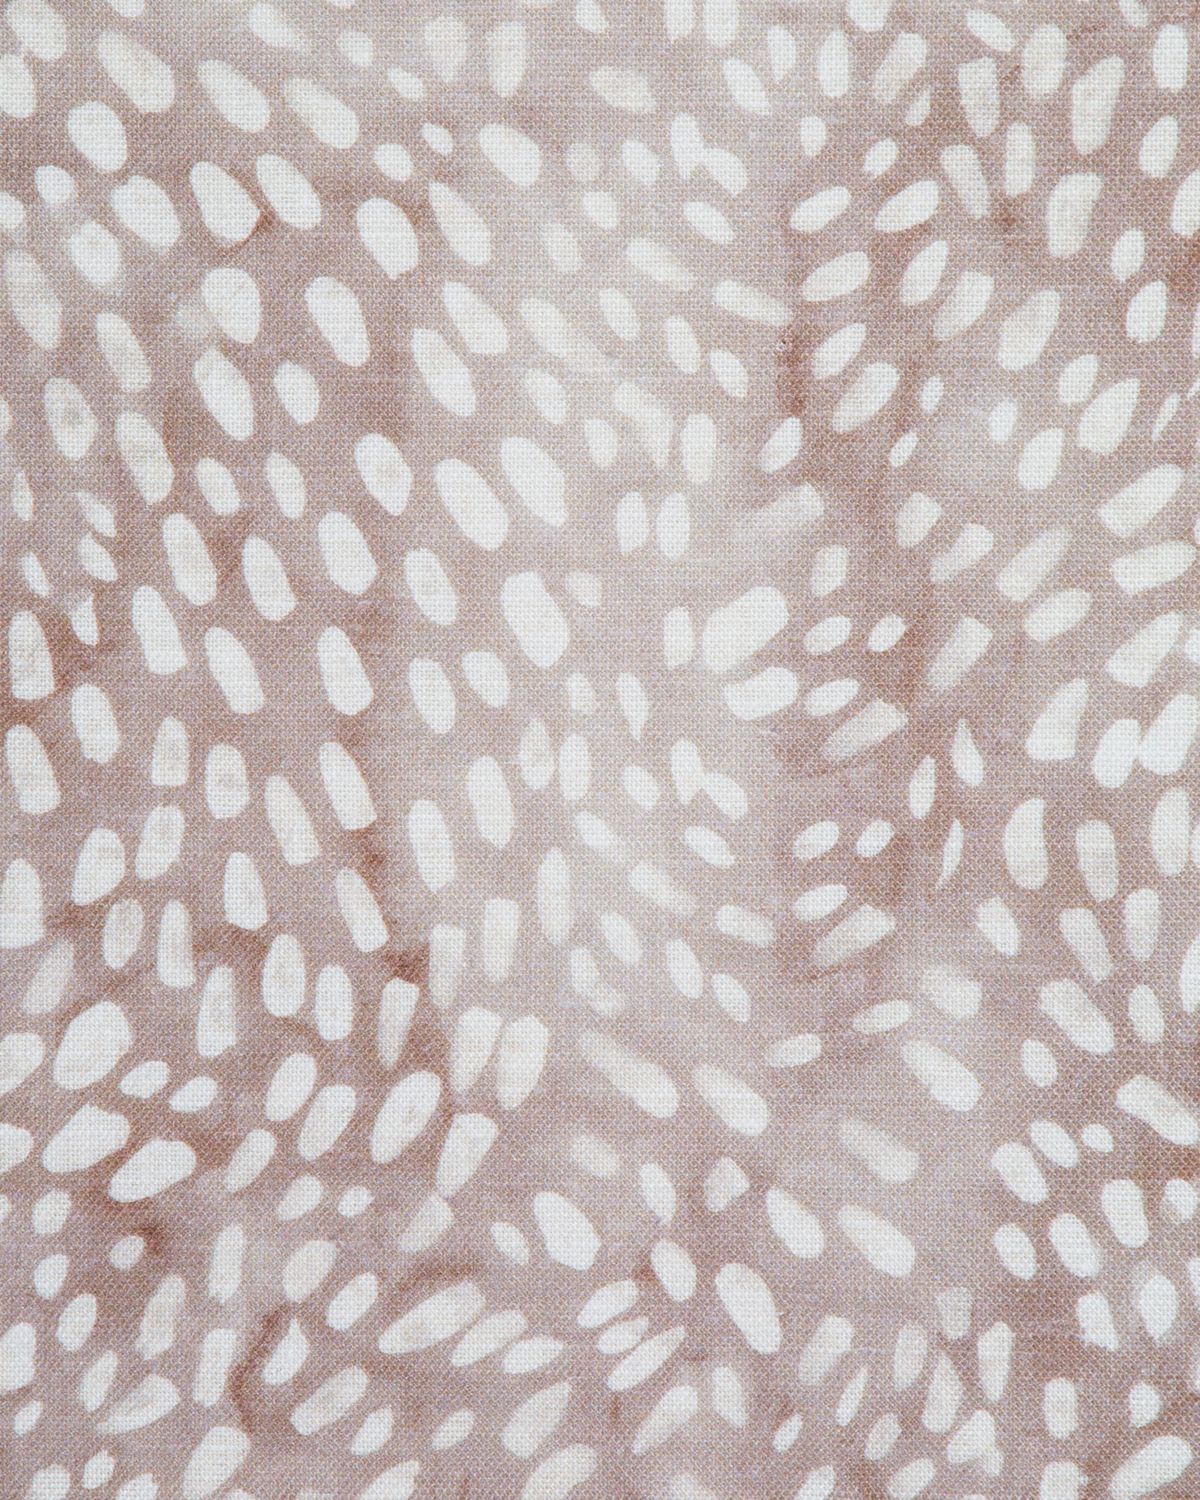 Speckled Fabric in Taupe/Fawn